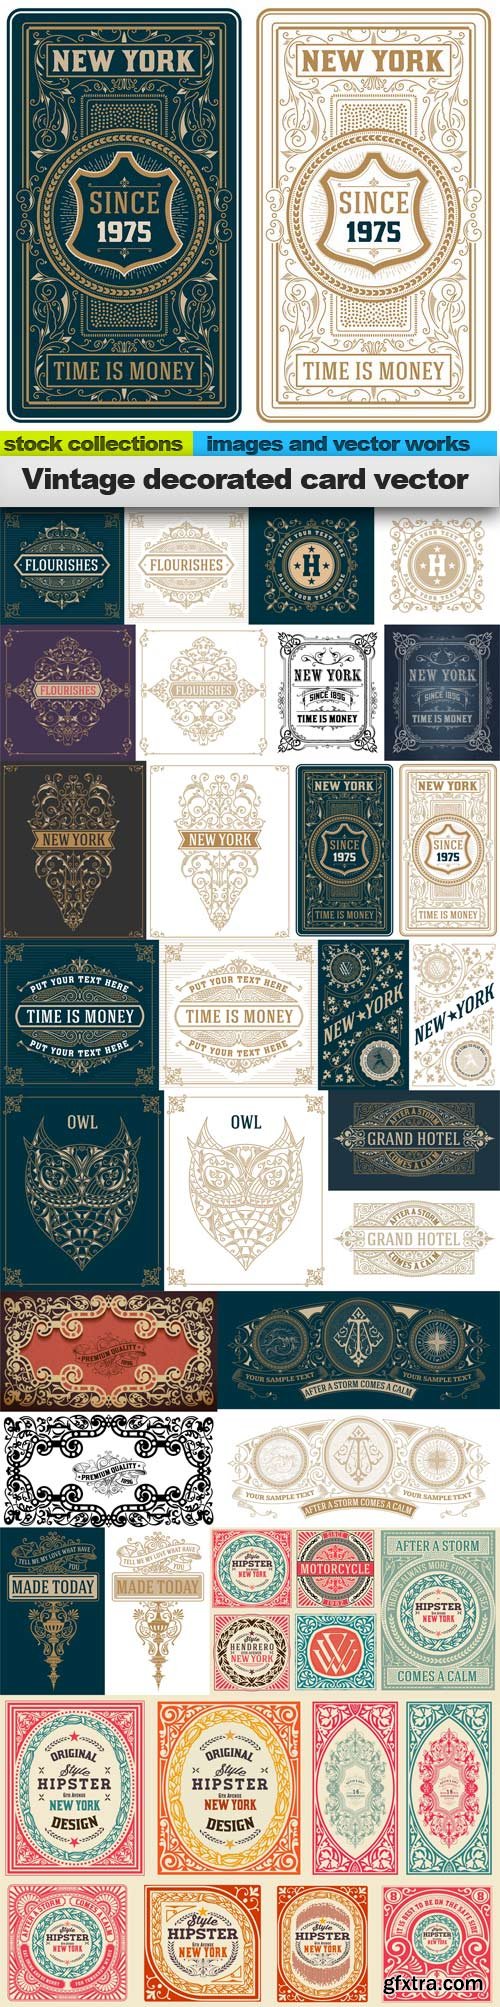 Vintage decorated card vector, 15 x EPS